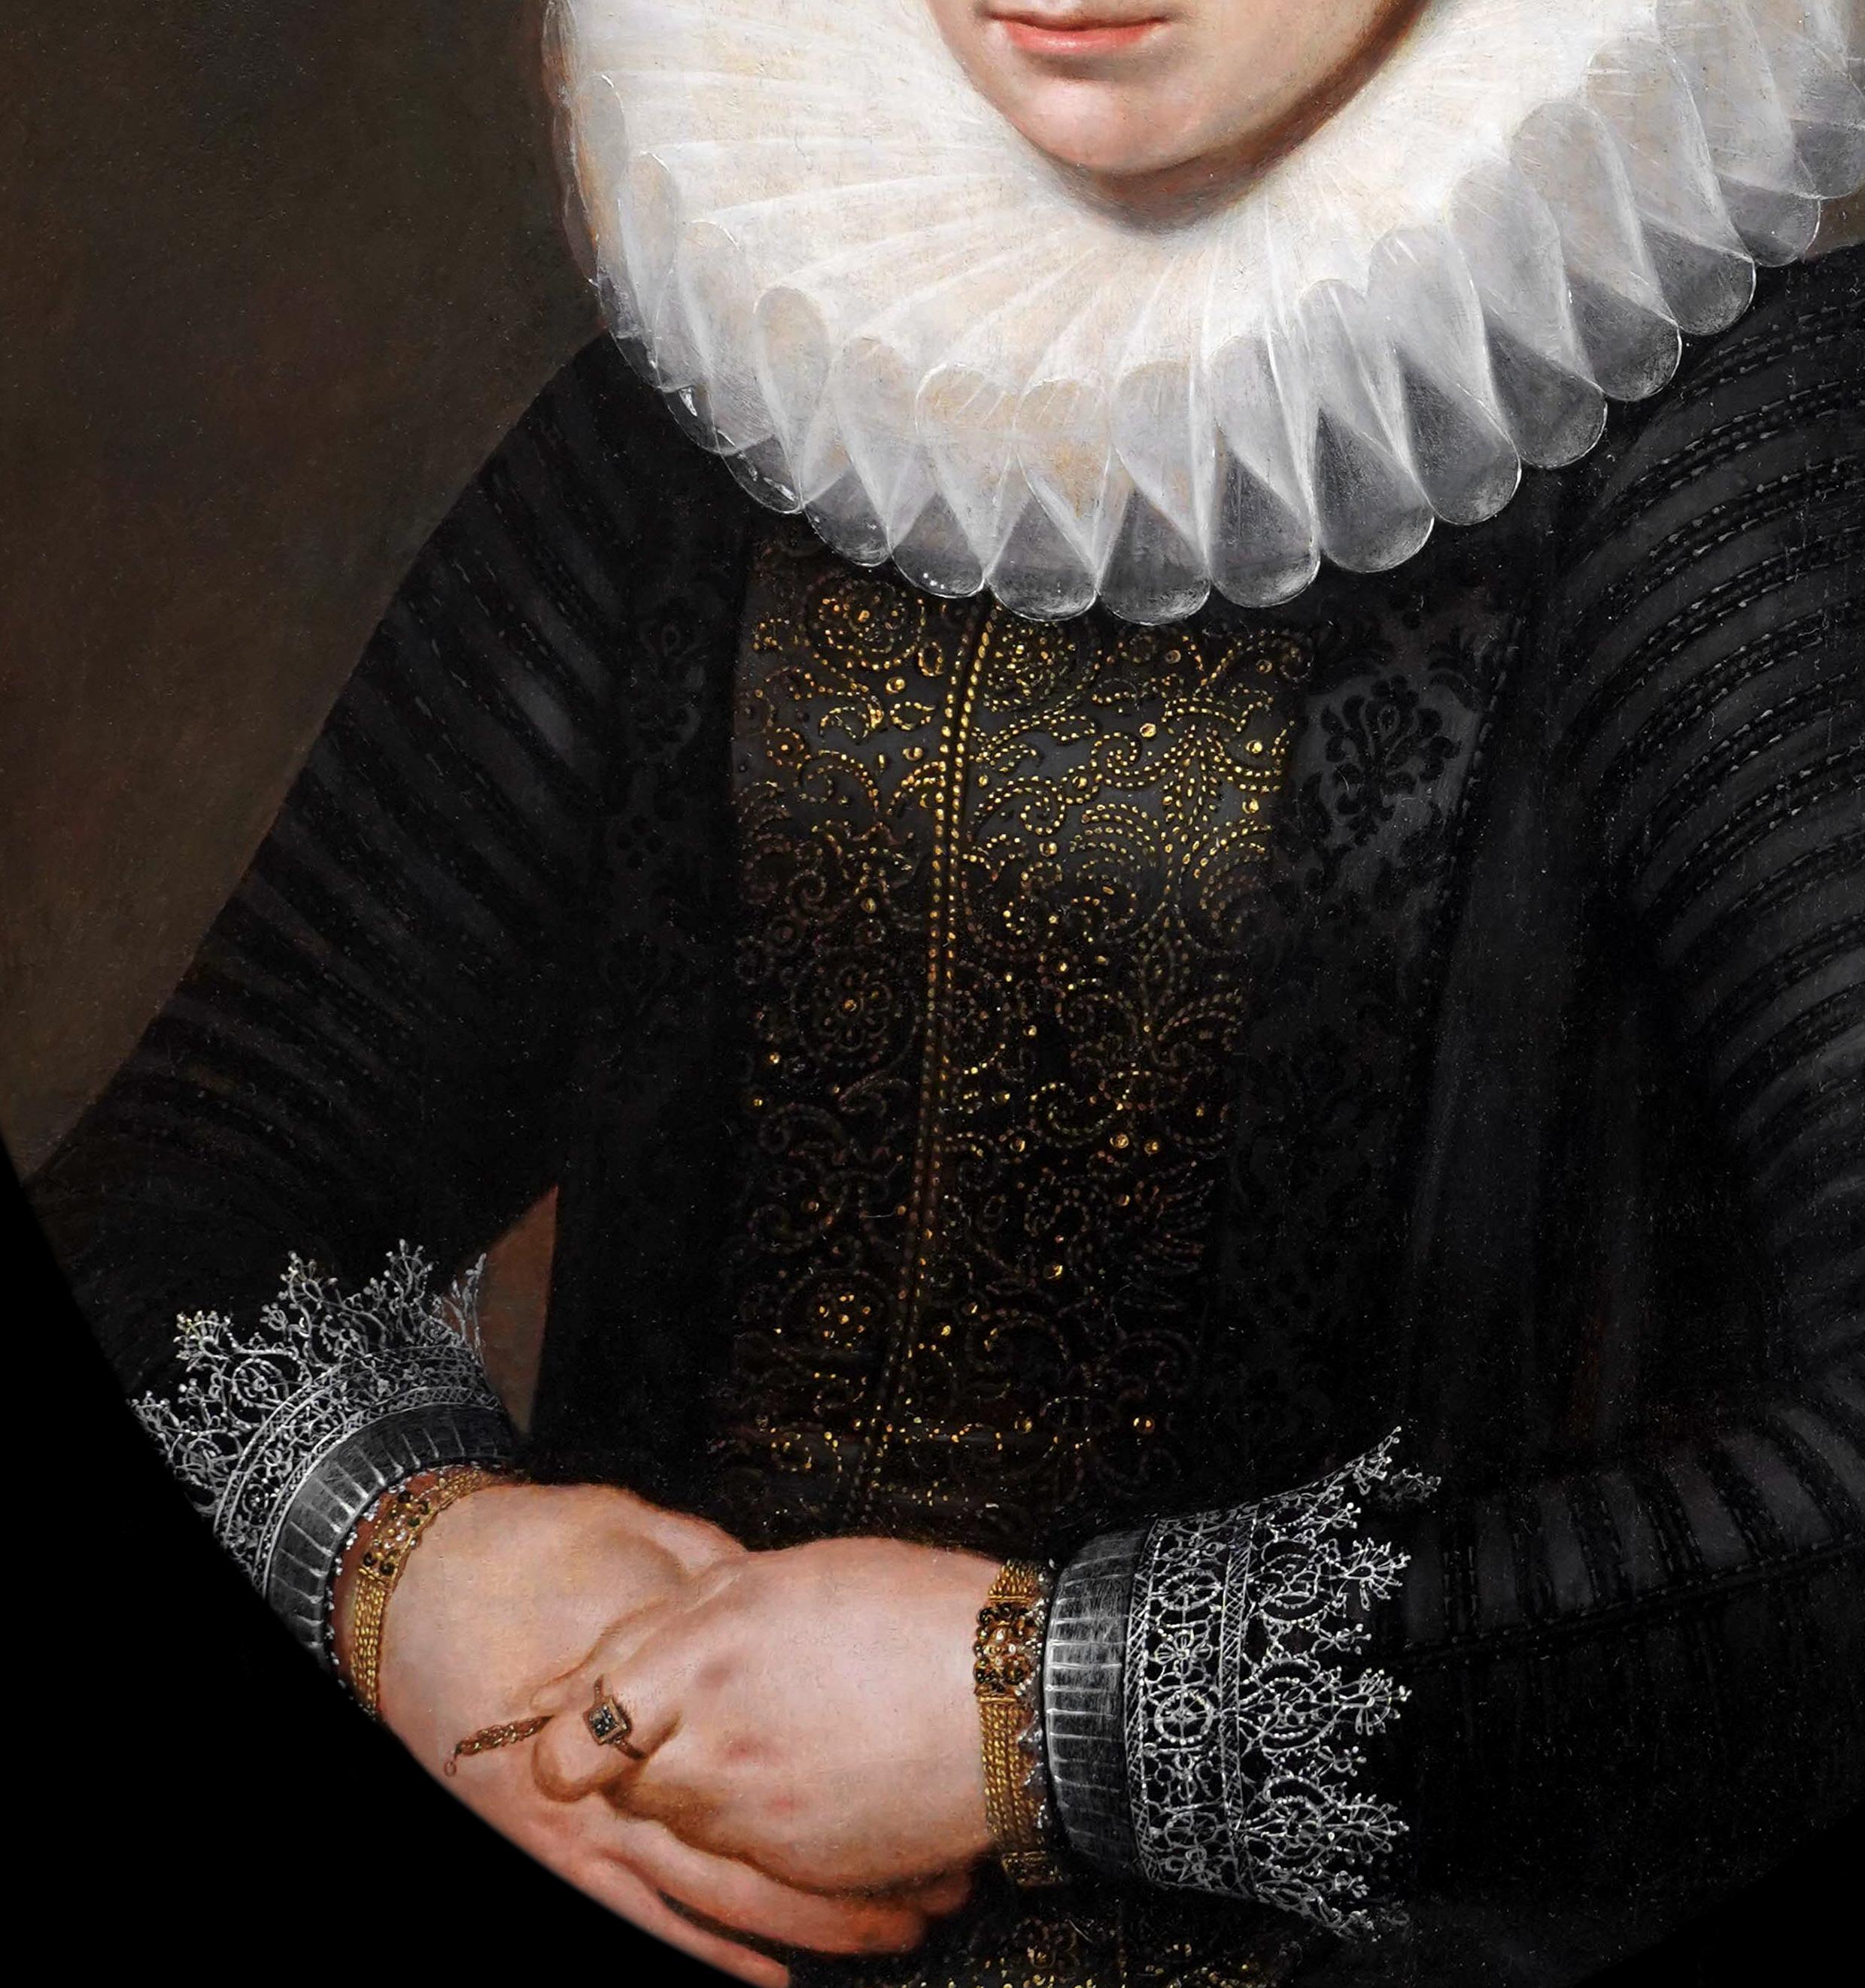 Portrait of a Lady in an Elaborate Ruff & Lace Coif c.1610-20, Dutch Old Master For Sale 5